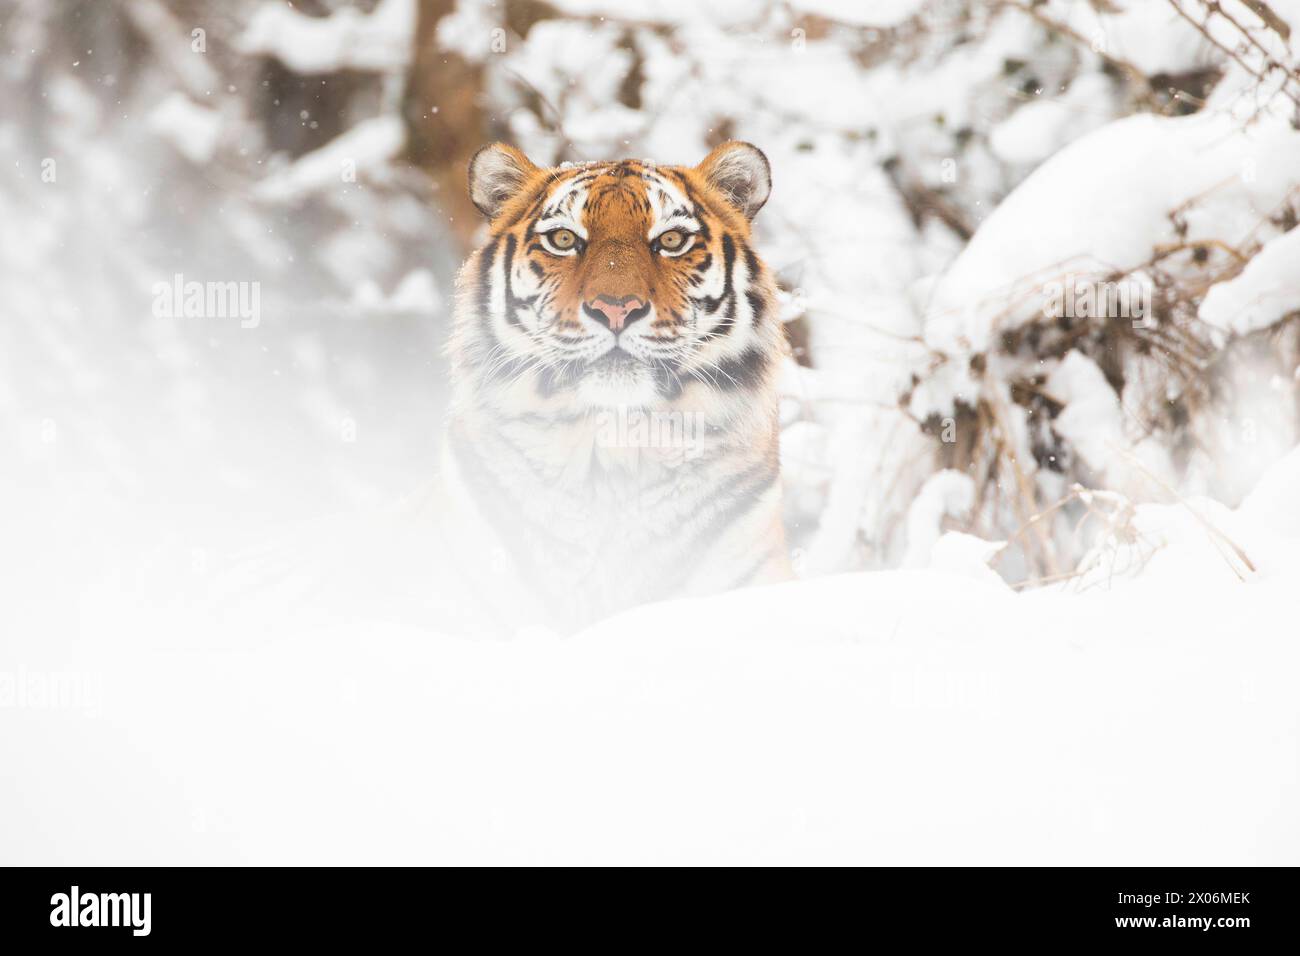 Siberian tiger, Amurian tiger (Panthera tigris altaica), looks out from behind the snow Stock Photo